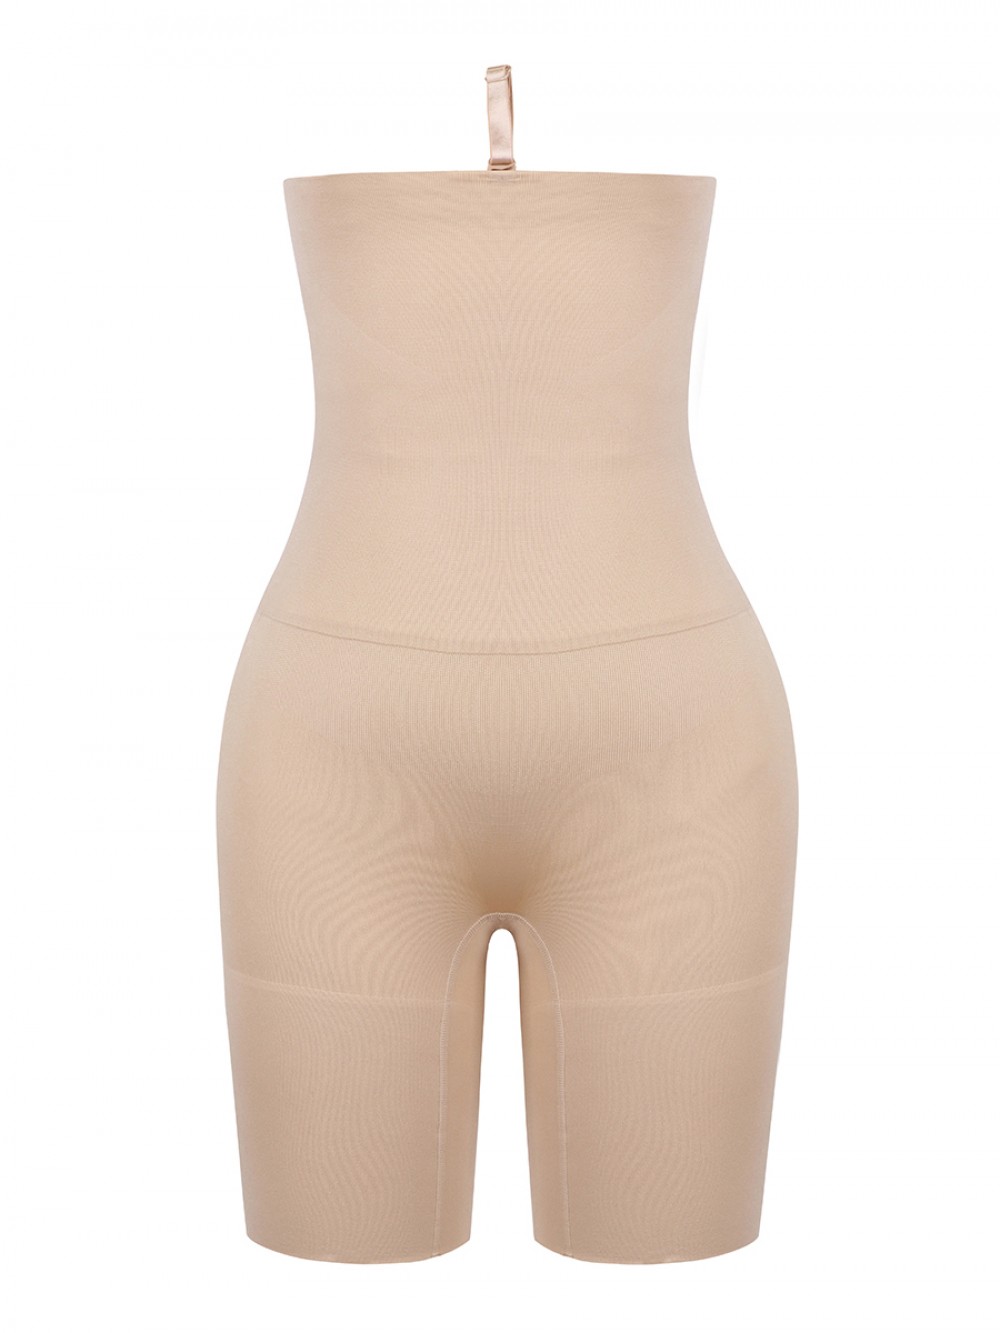 Nude Seamless Body Shaper Buckle Mid-Thigh Curve-Creating